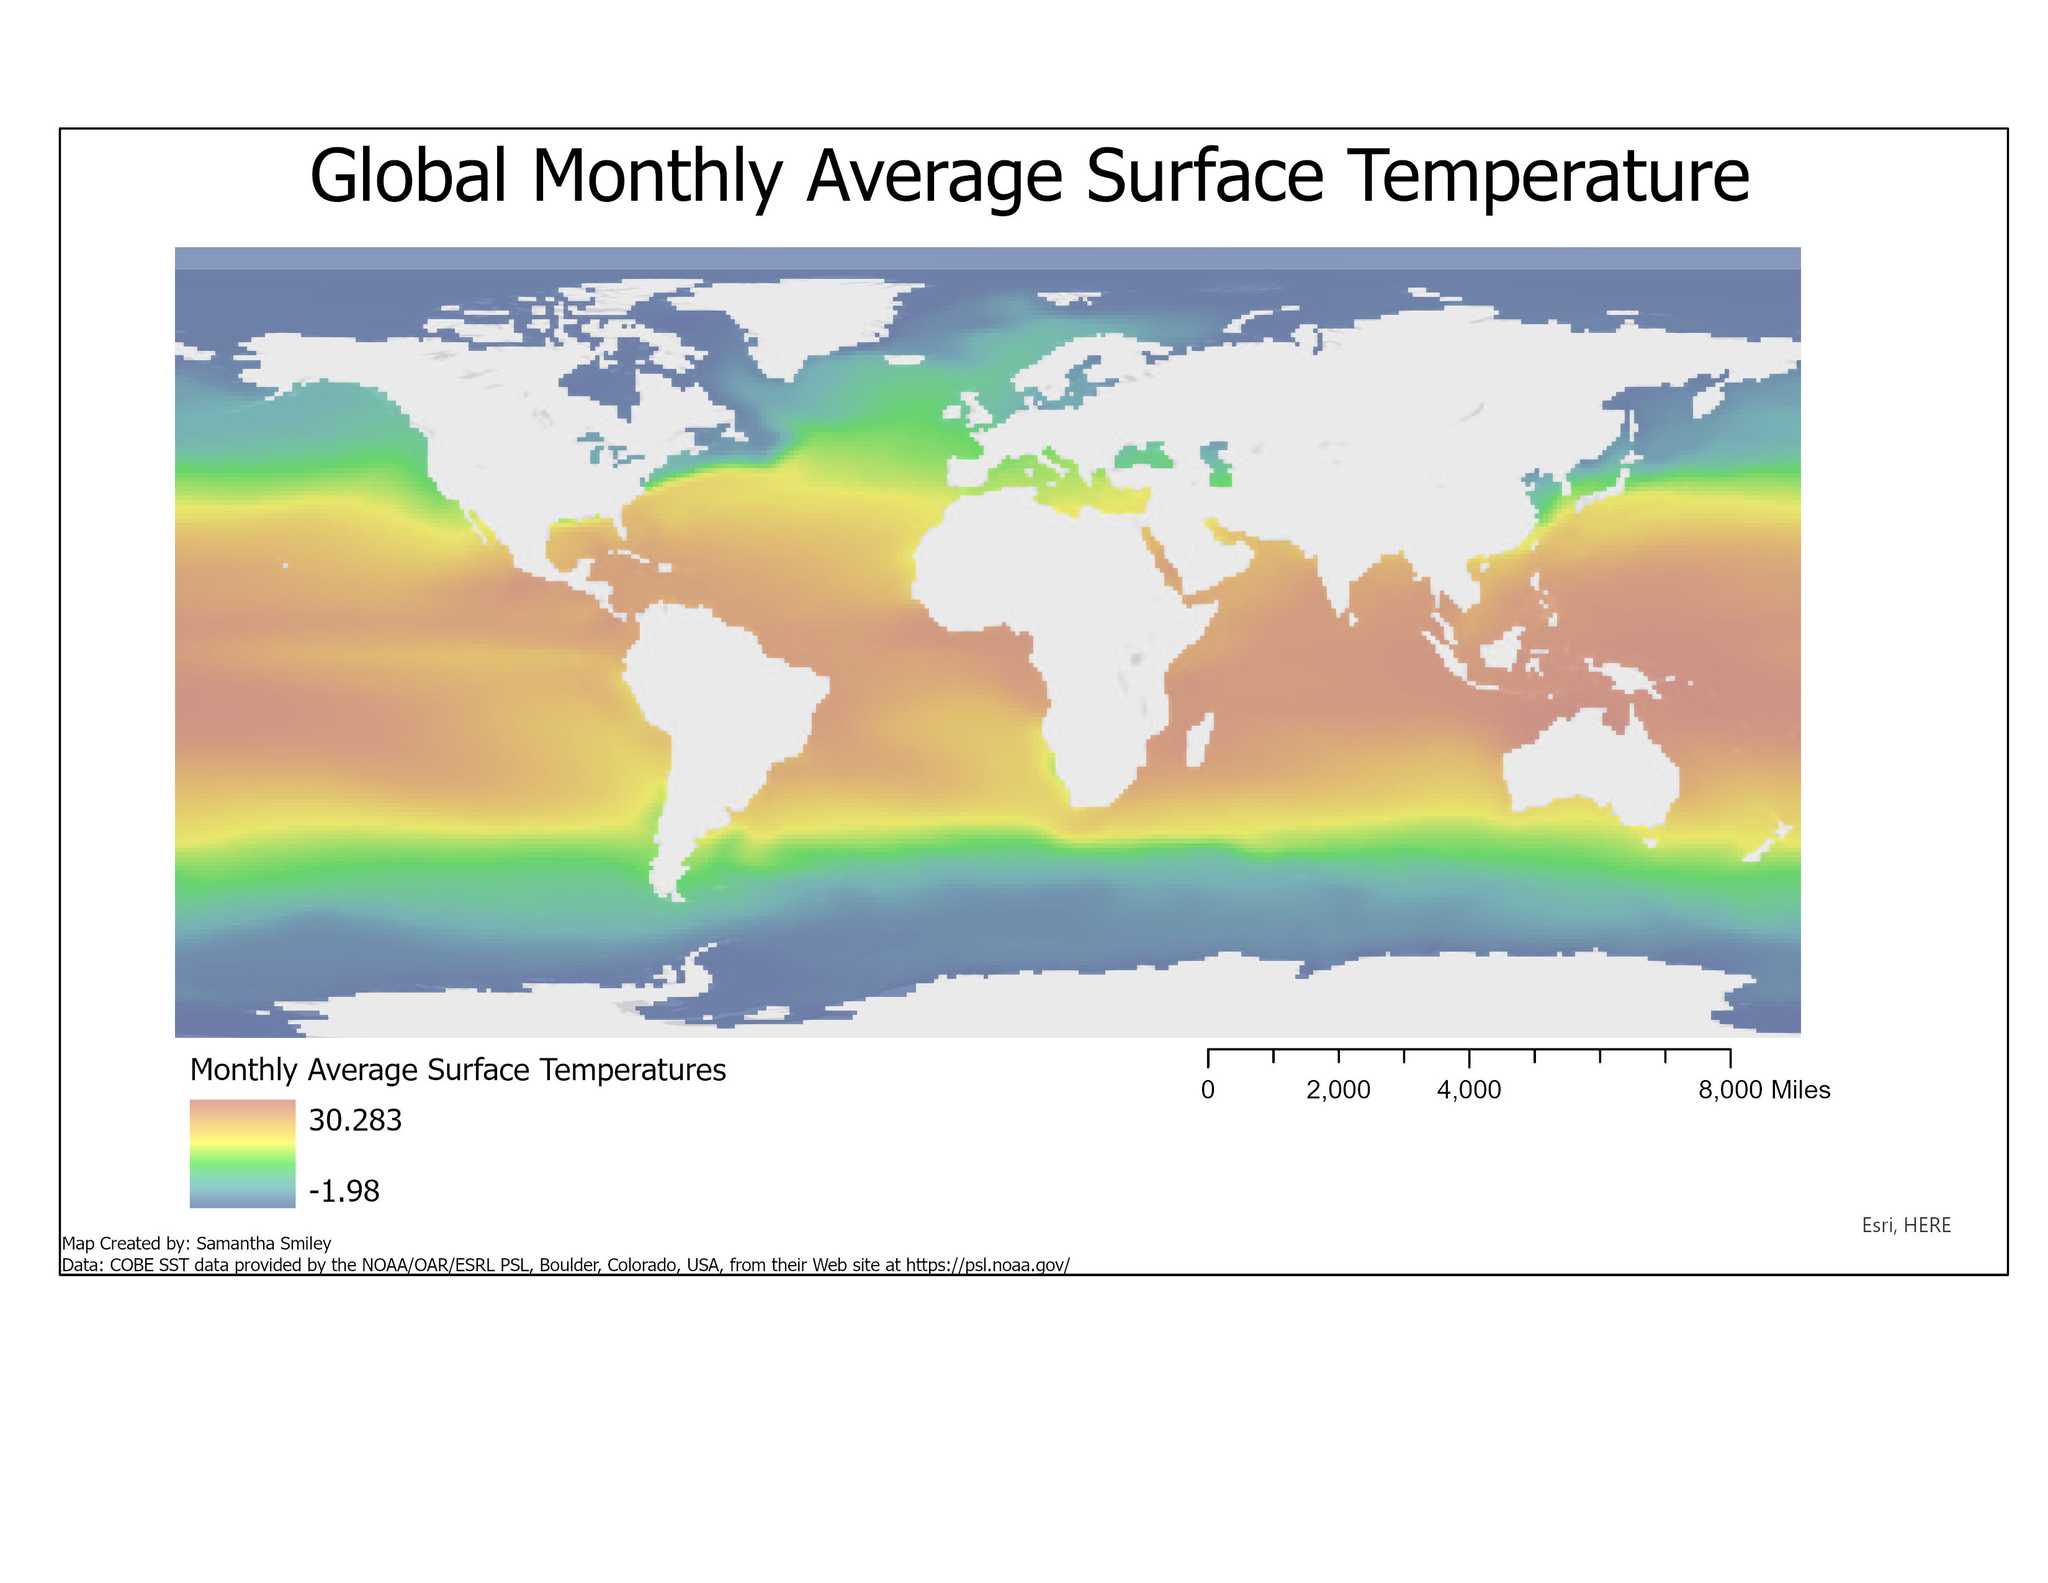 Global monthly average surface temperature